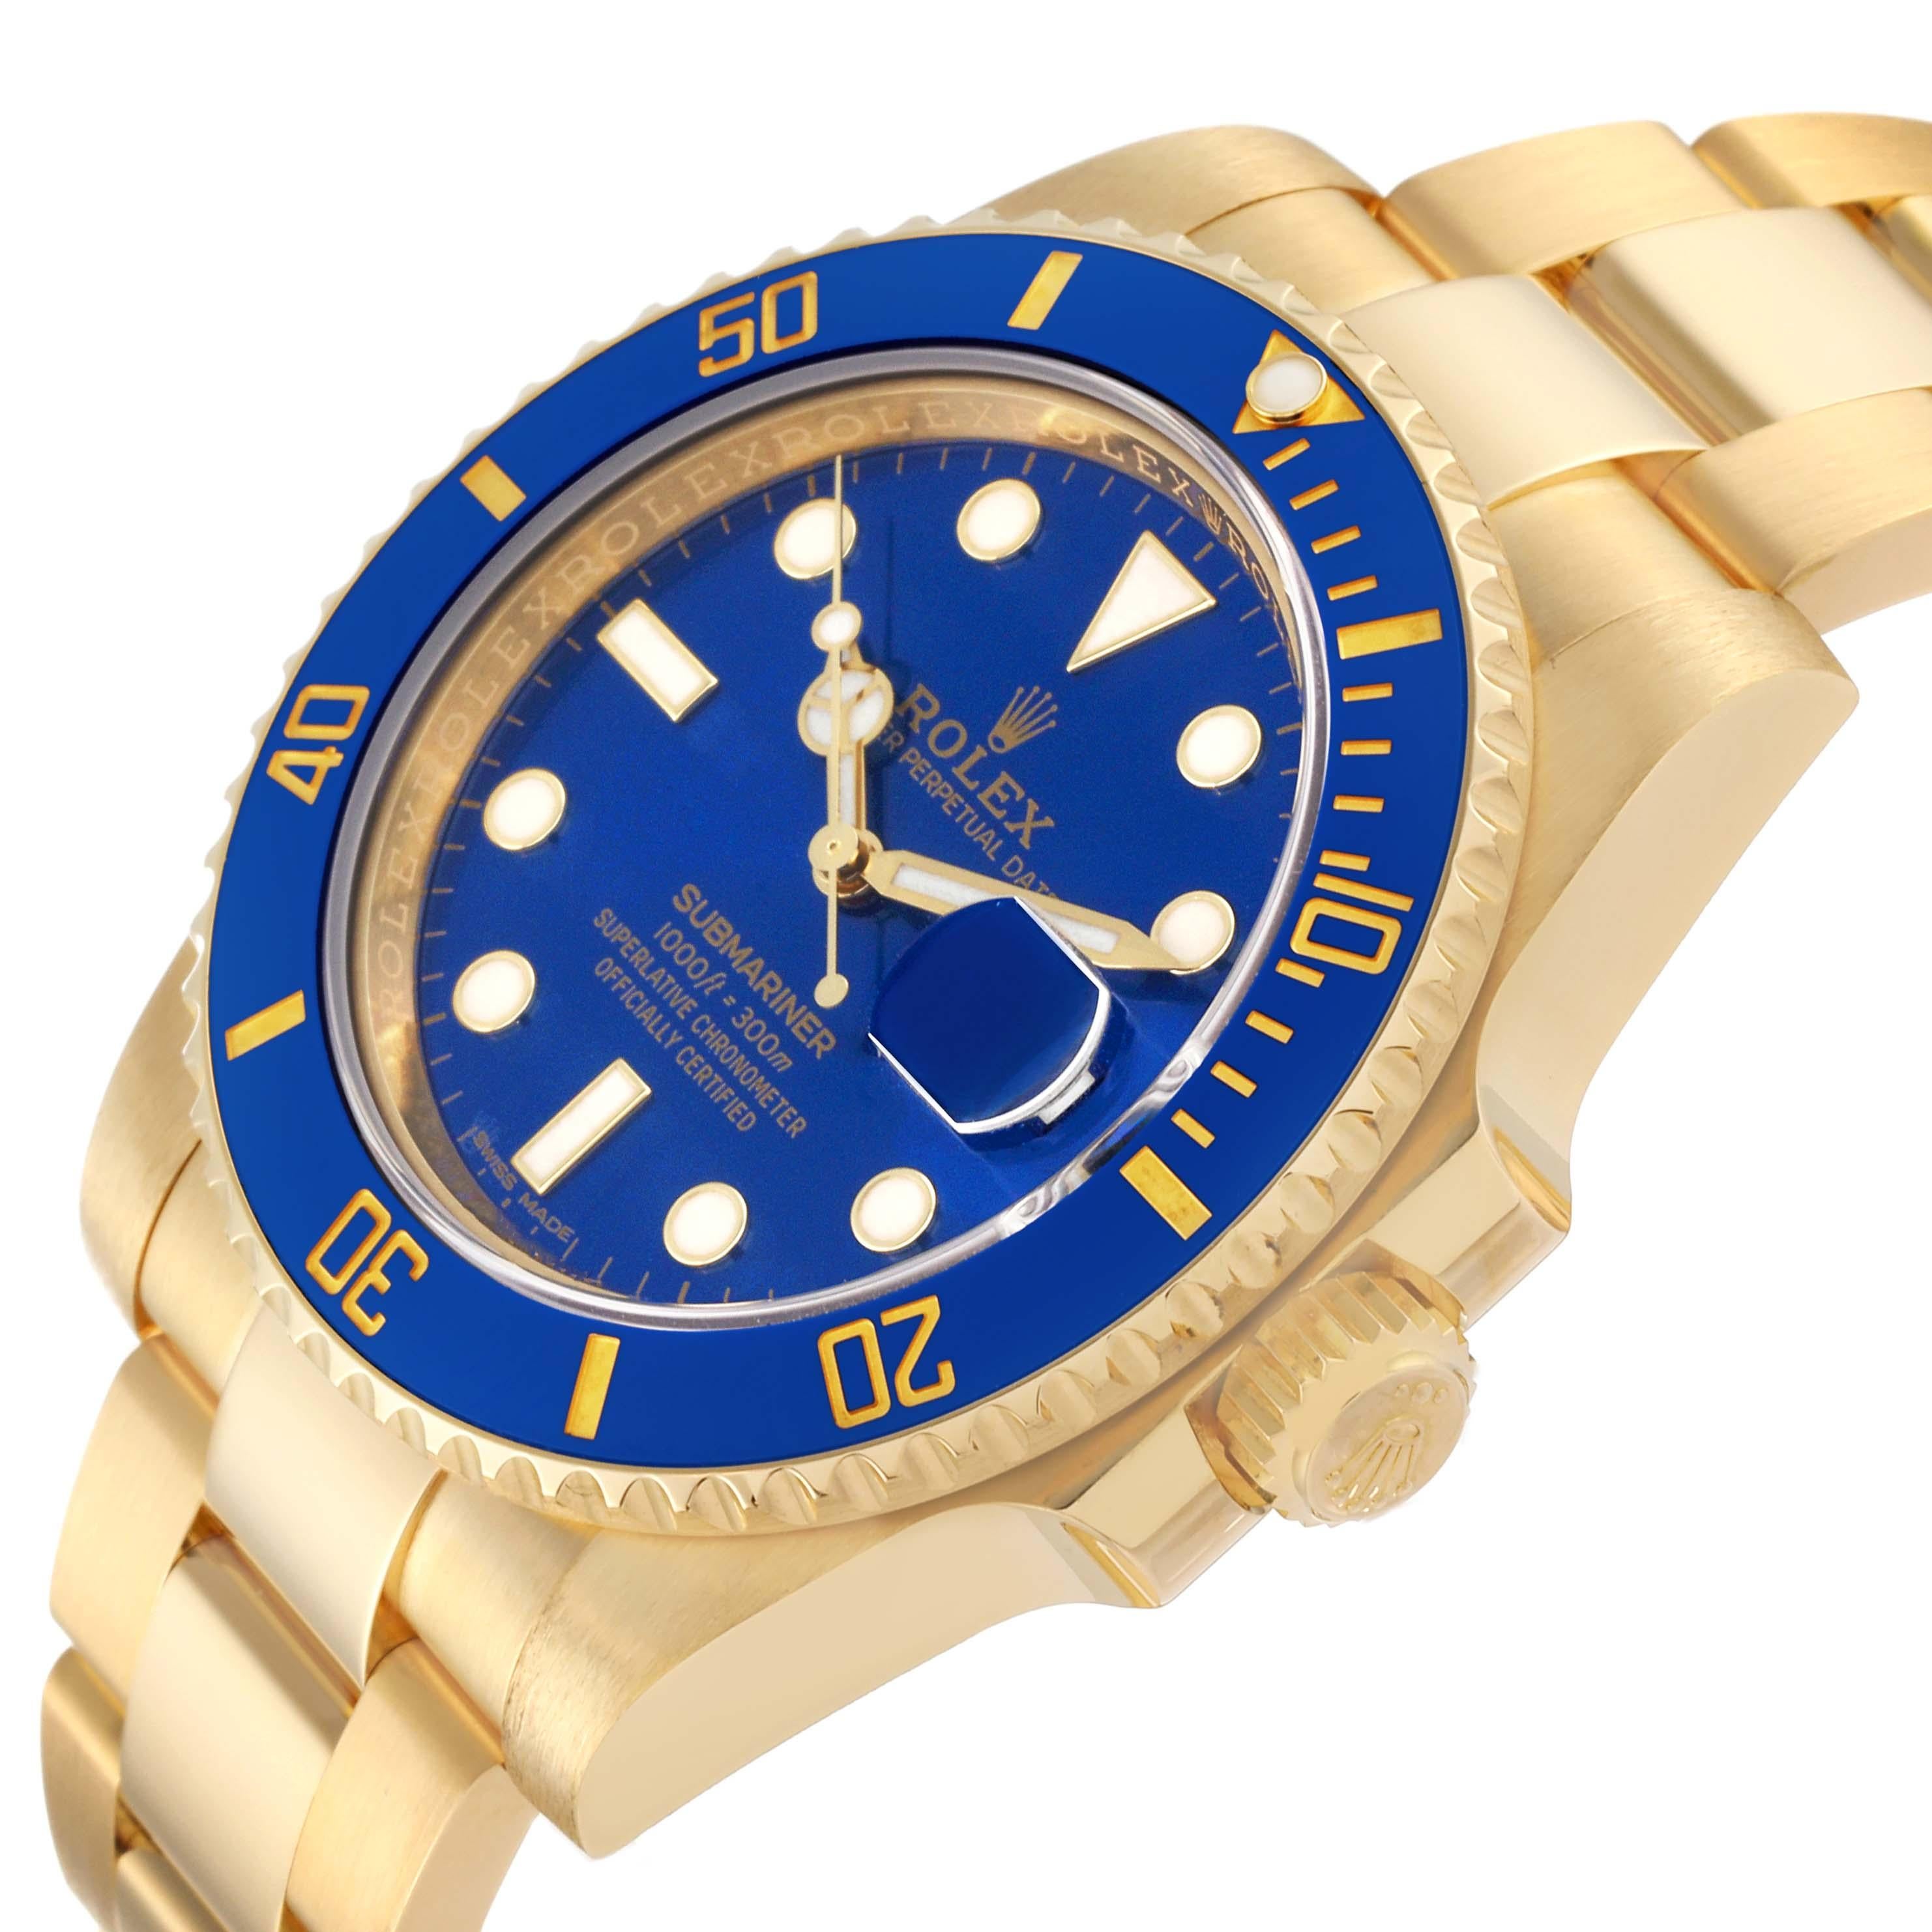 Rolex Submariner Yellow Gold Blue Dial Ceramic Bezel Mens Watch 116618 Box Card. Officially certified chronometer automatic self-winding movement. 18k yellow gold case 40.0 mm in diameter. Rolex logo on a crown. Ceramic blue Ion-plated special